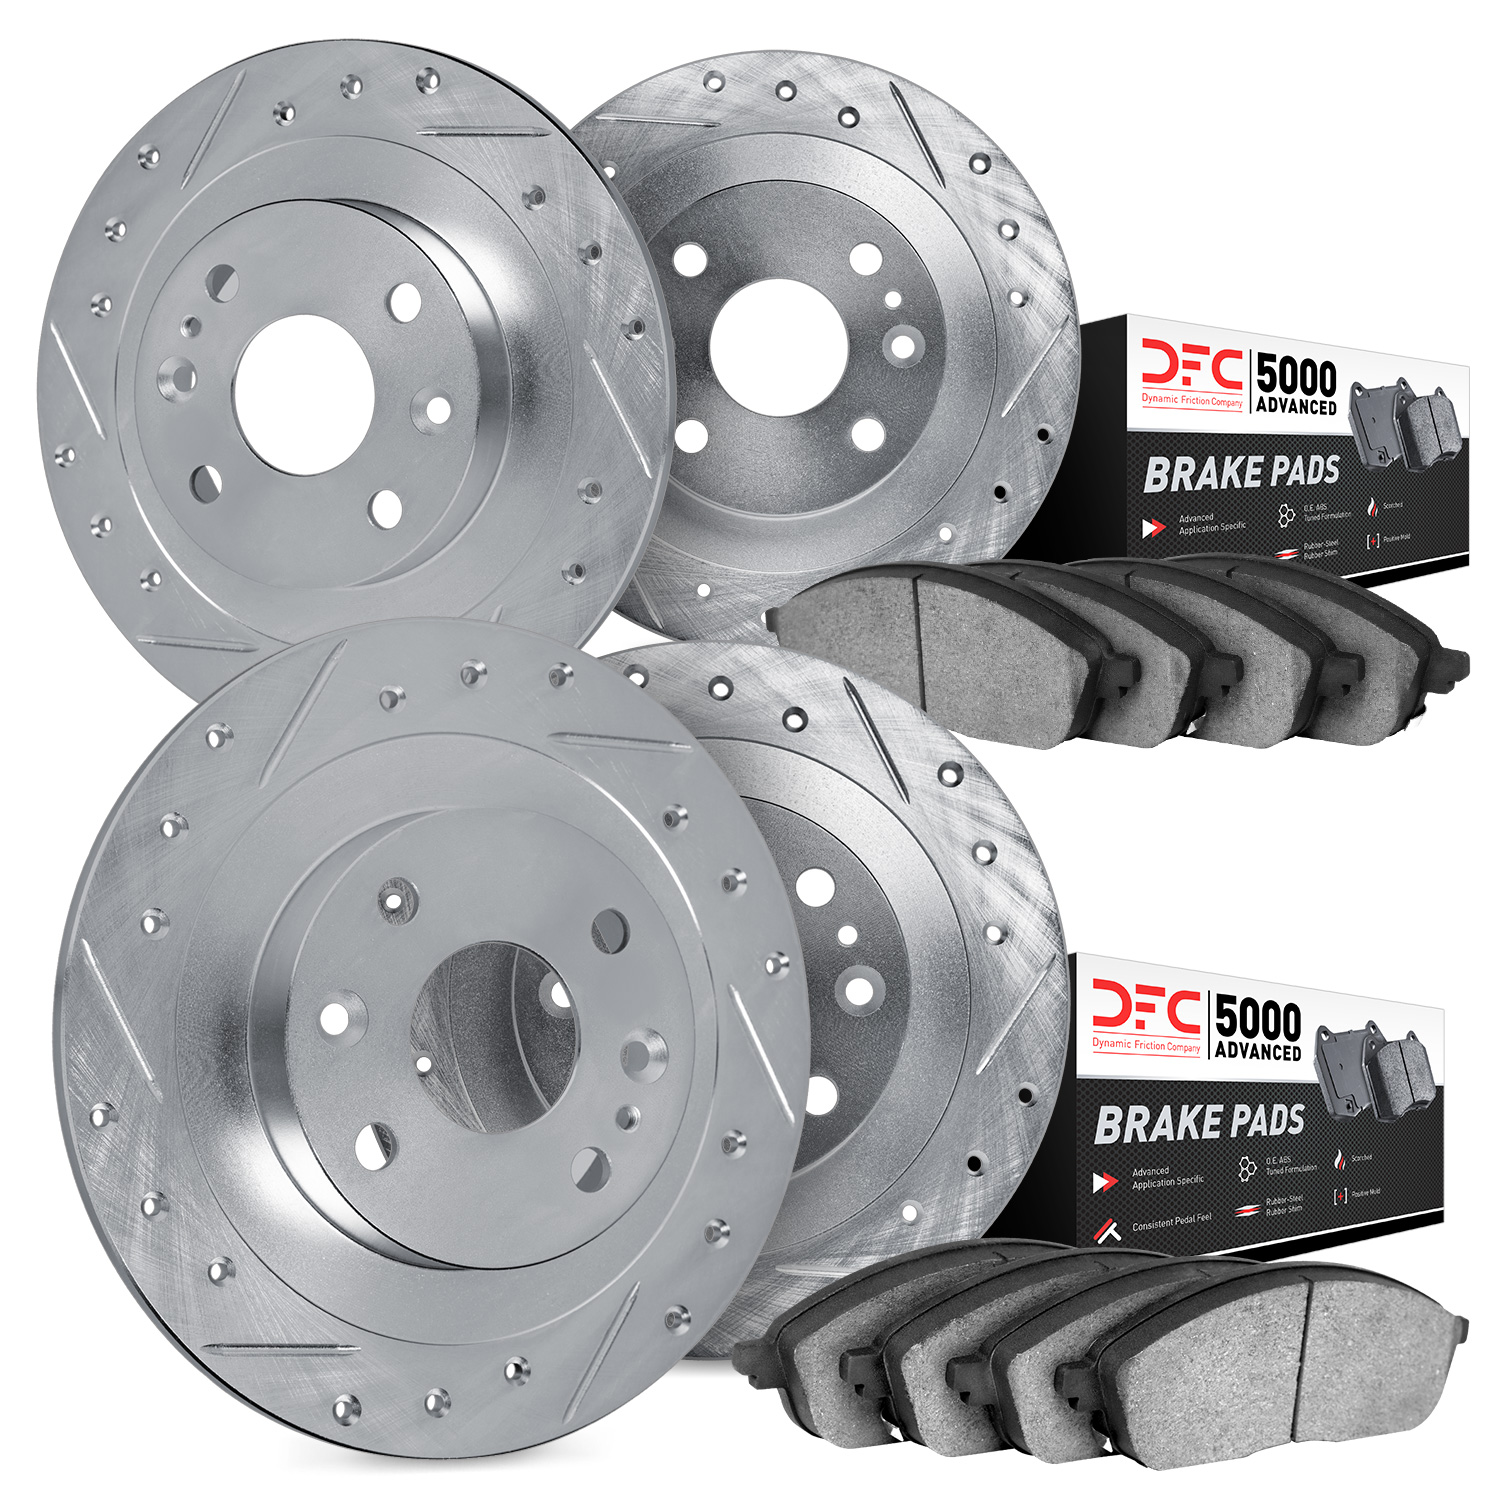 7504-28002 Drilled/Slotted Brake Rotors w/5000 Advanced Brake Pads Kit [Silver], 1980-1989 Peugeot, Position: Front and Rear